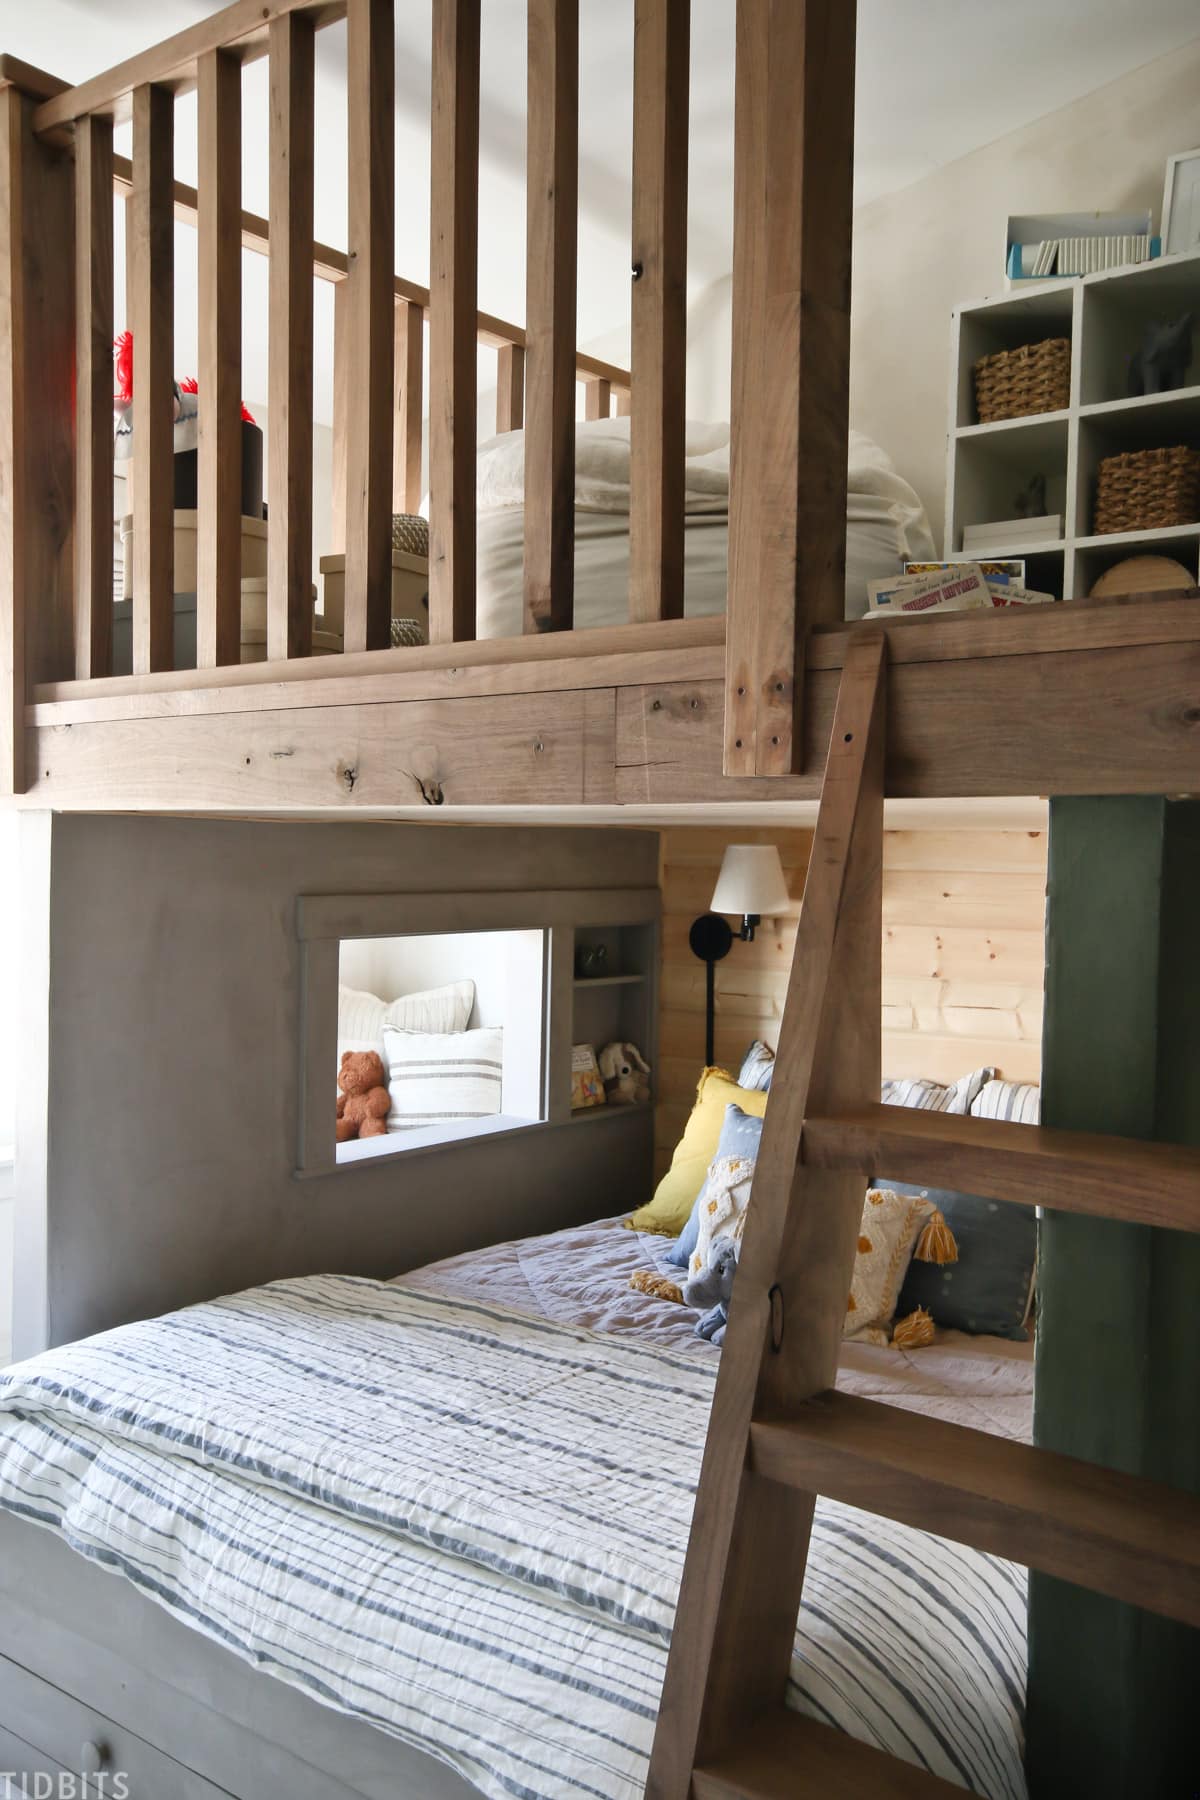 bedroom loft above two beds in a shared kids bedroom